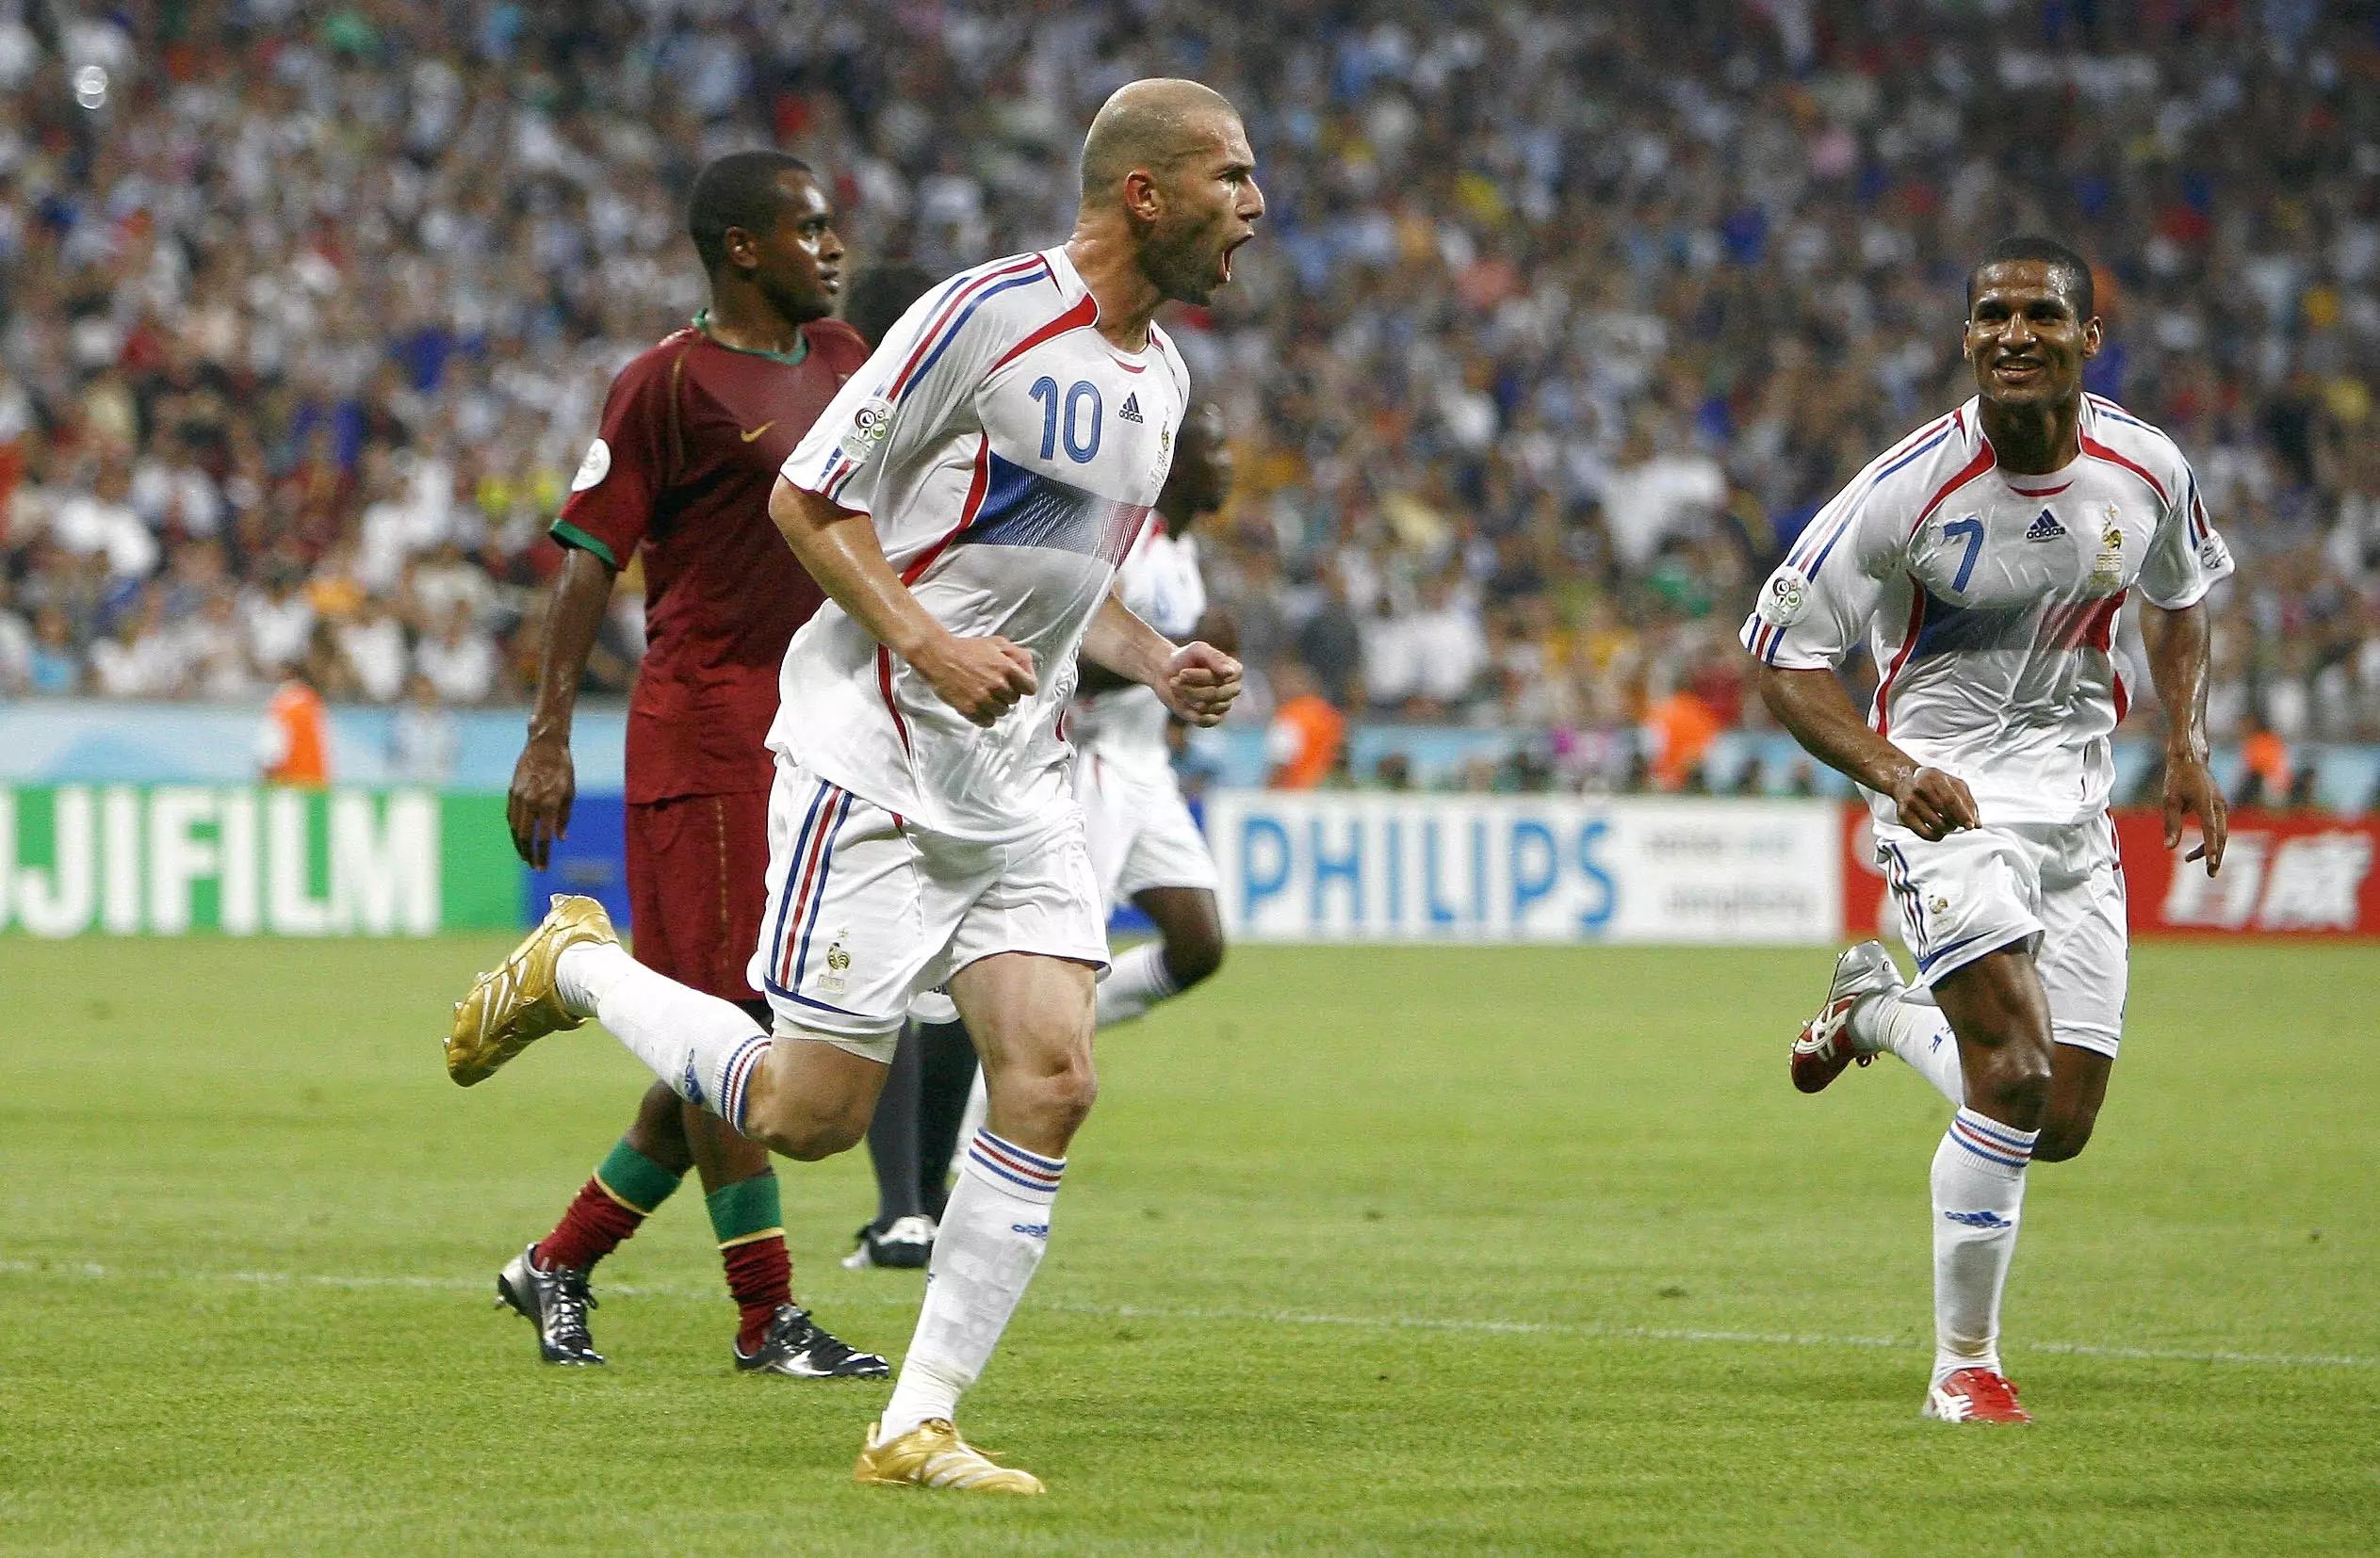 Zidane scored a penalty against Portugal in the semi-final. Image: PA Images